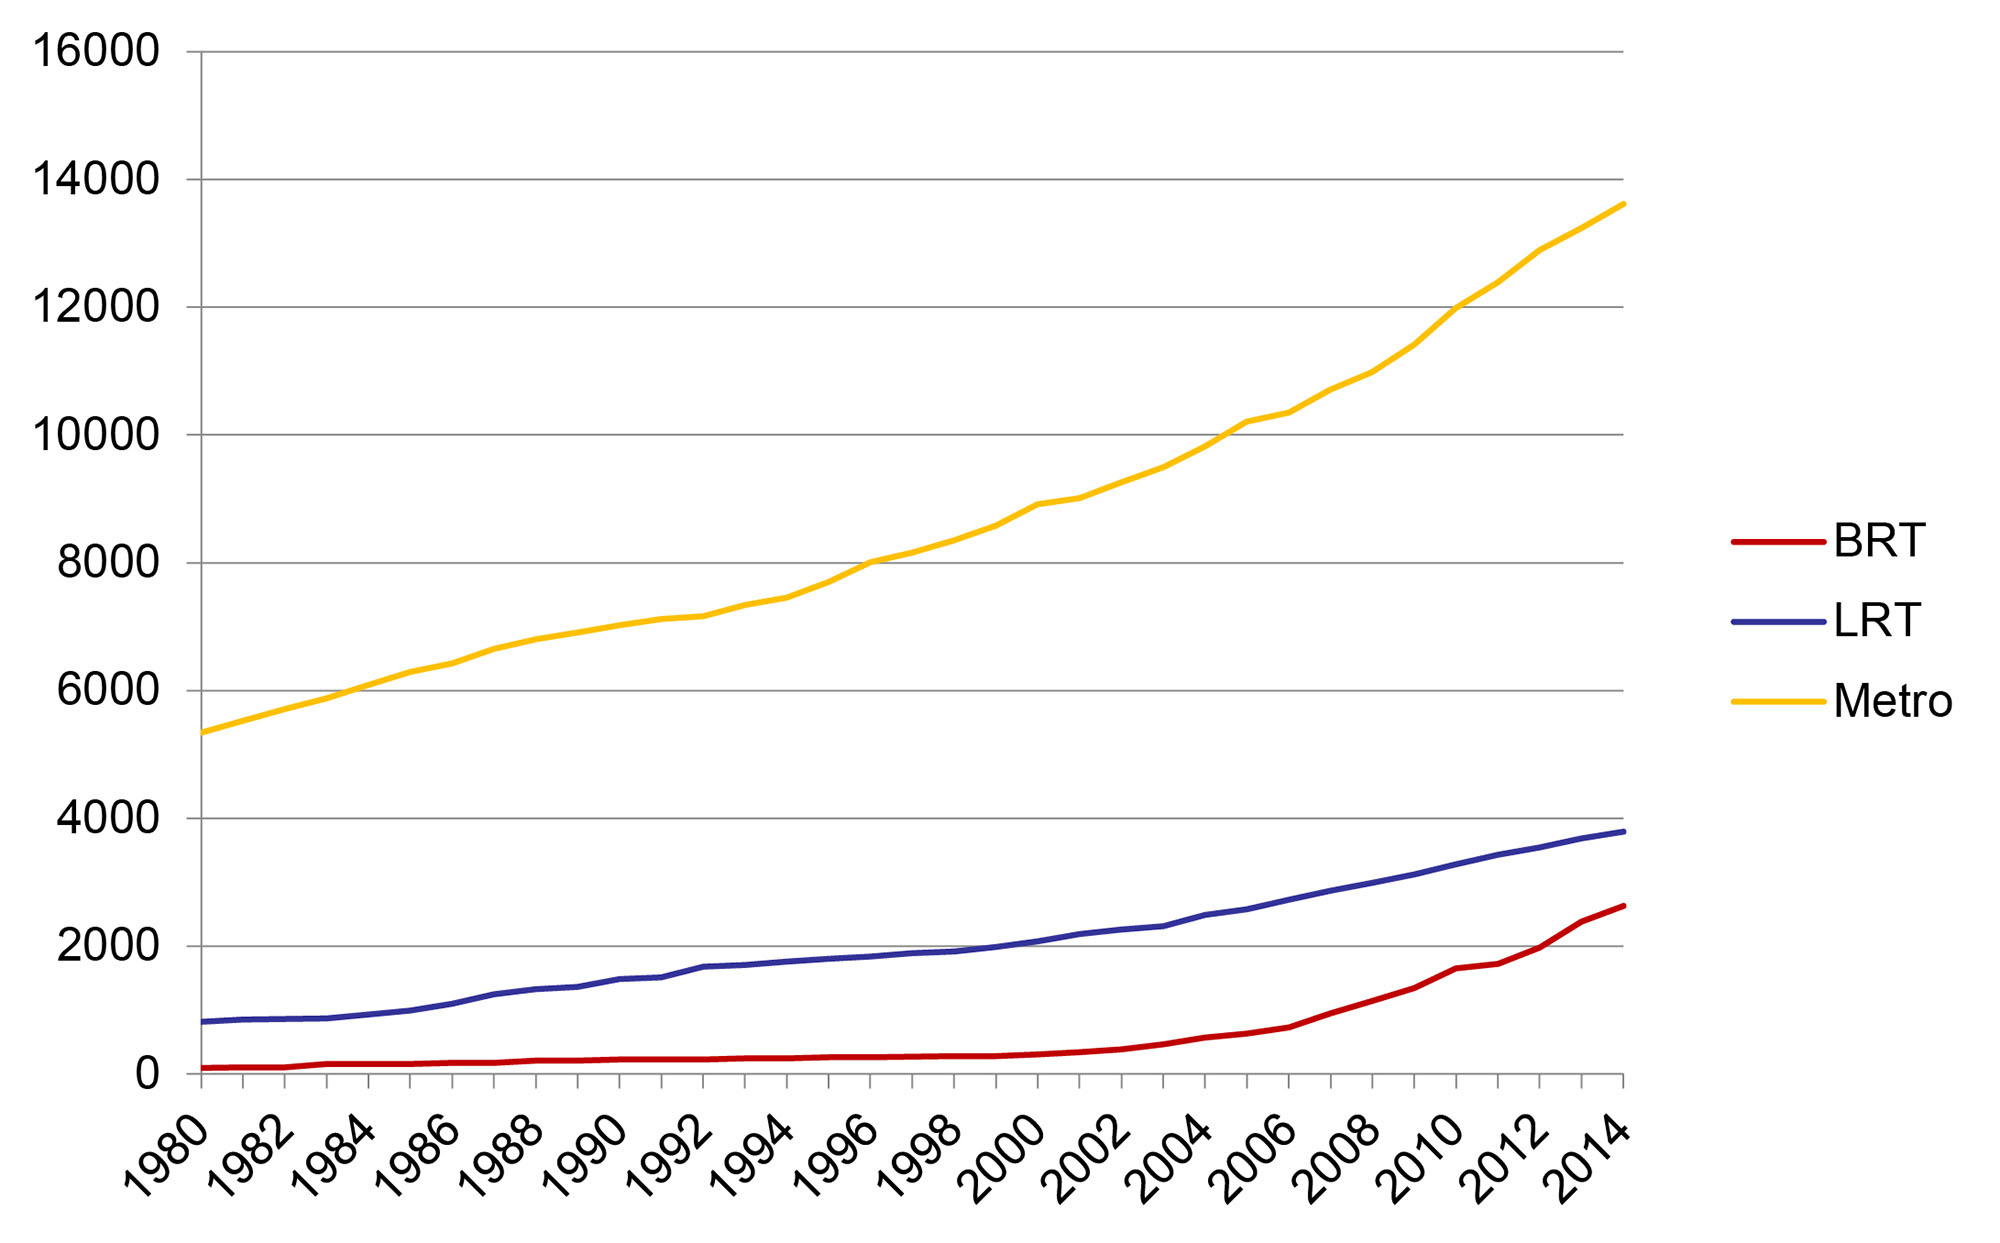 Fig. 1.1 Growth in kilometers of mass transit options around the world.